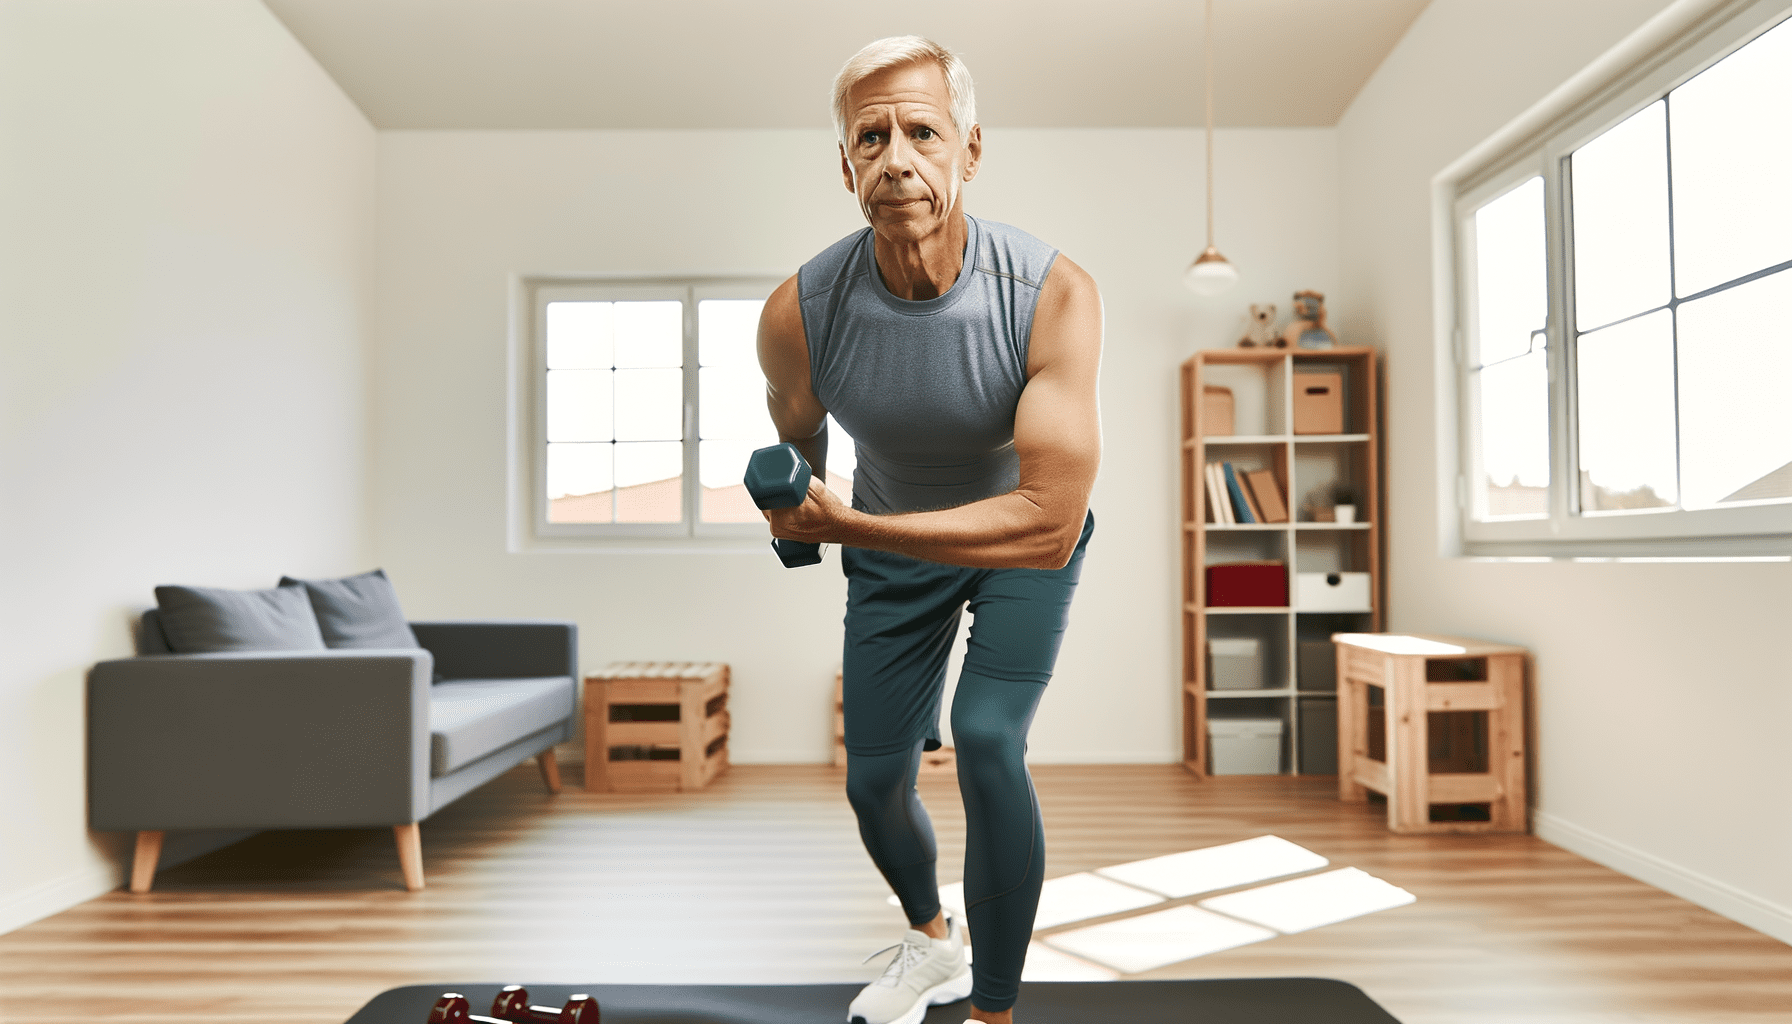 Home-Based Heroics: Custom Workout Routines for Men 55+